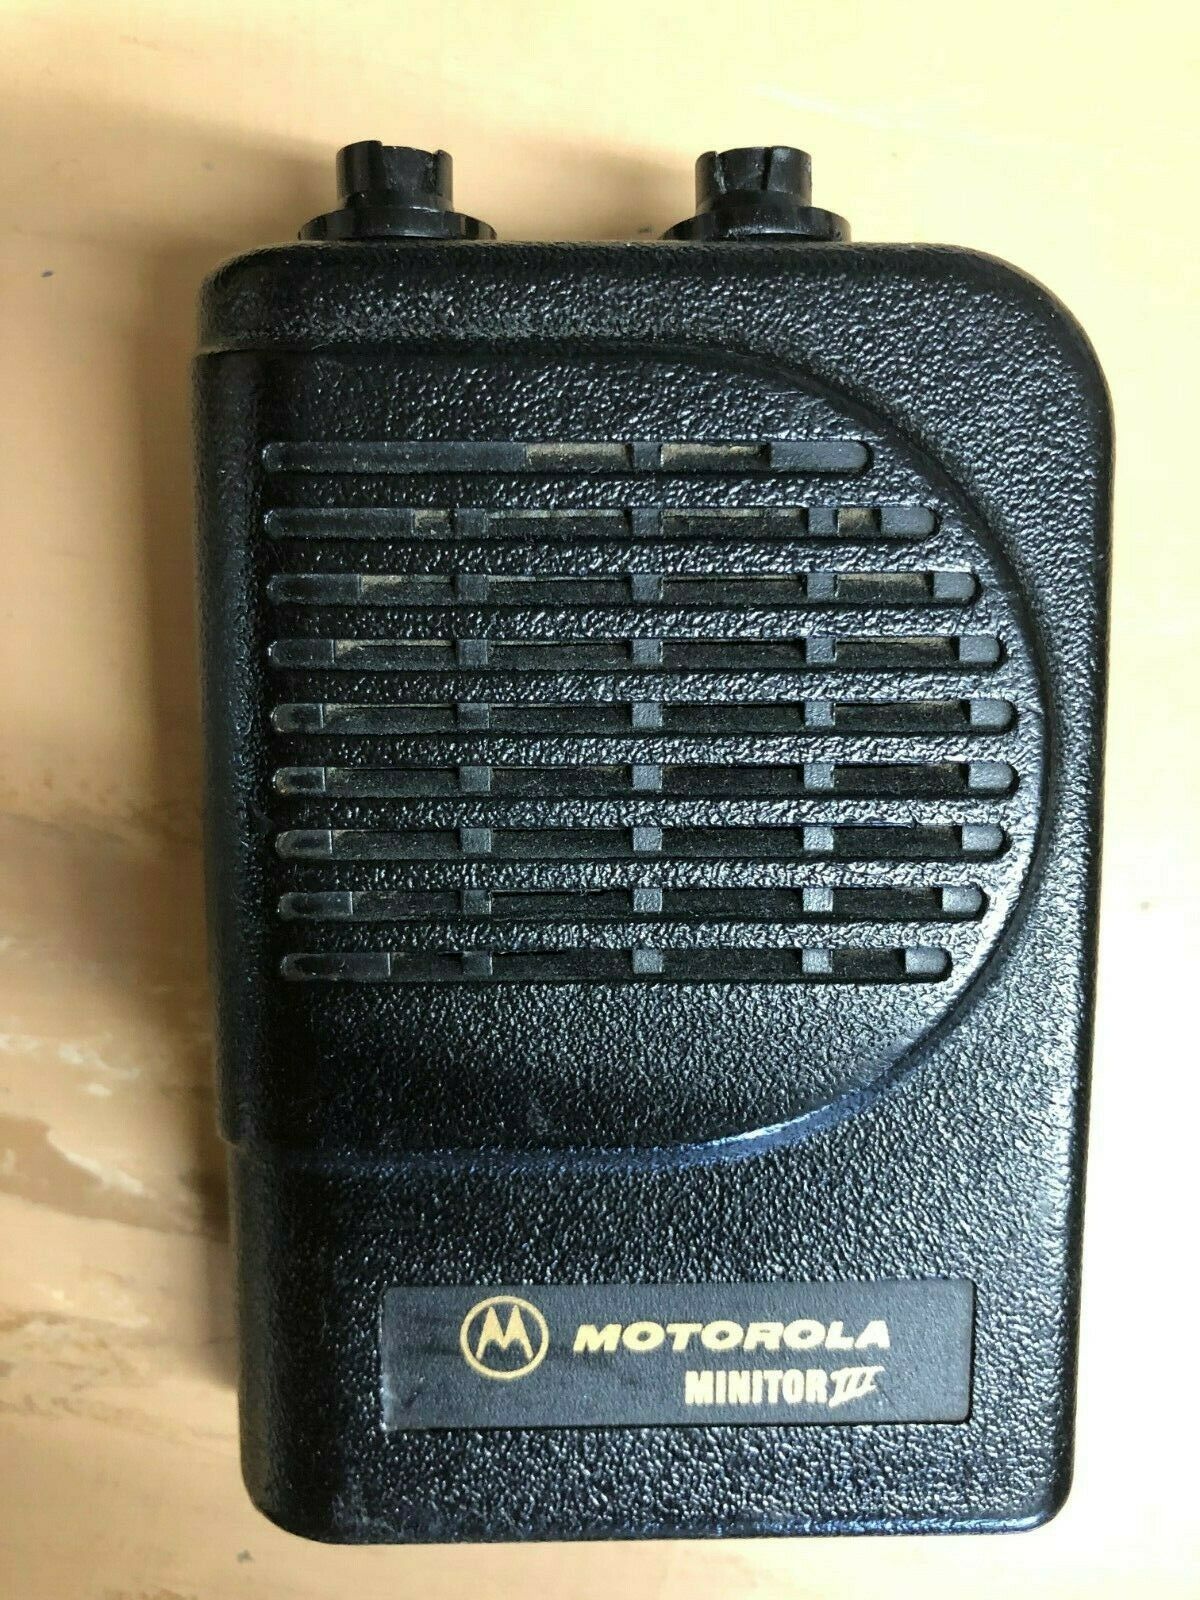 2 X Leather case Motorola pager Minitor 3 and Apollo 100/101,etc.heavy duty